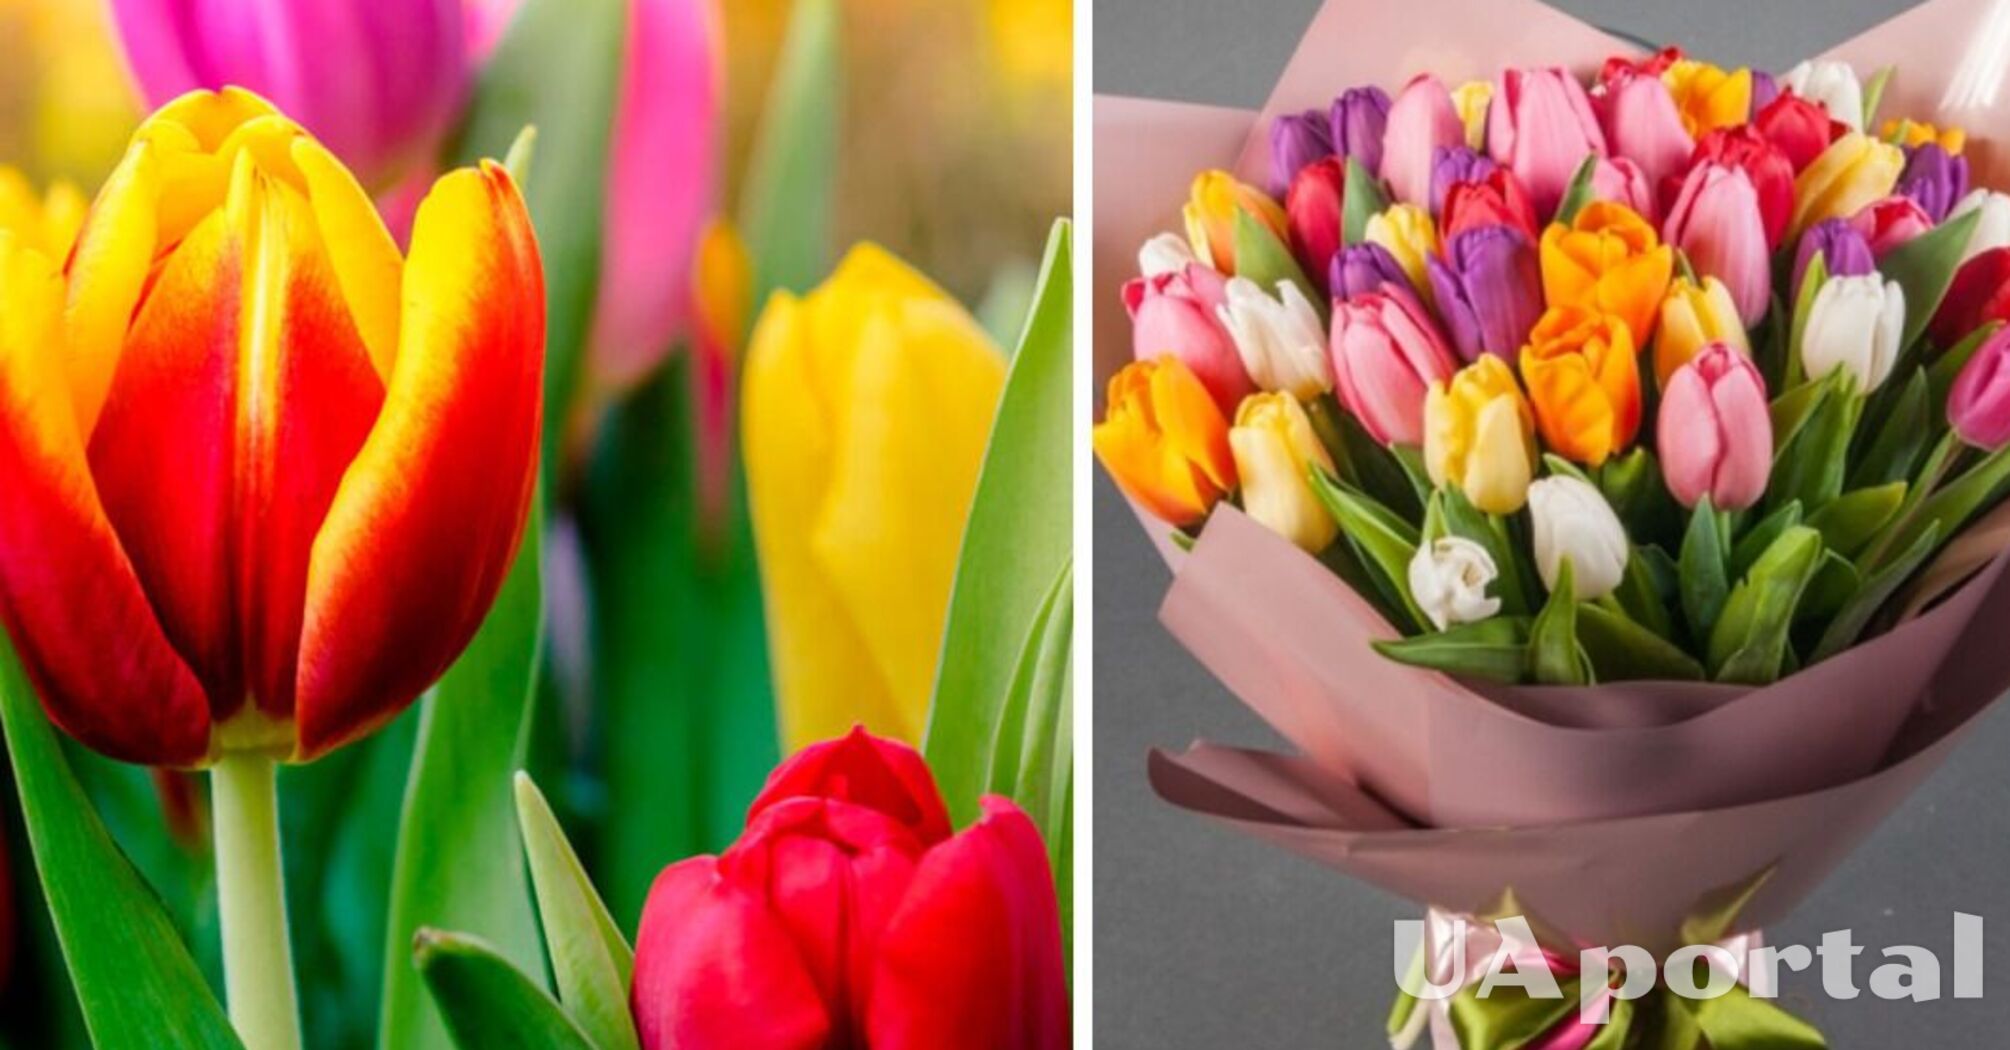 They will delight the eye for a long time: how to keep tulips fresh